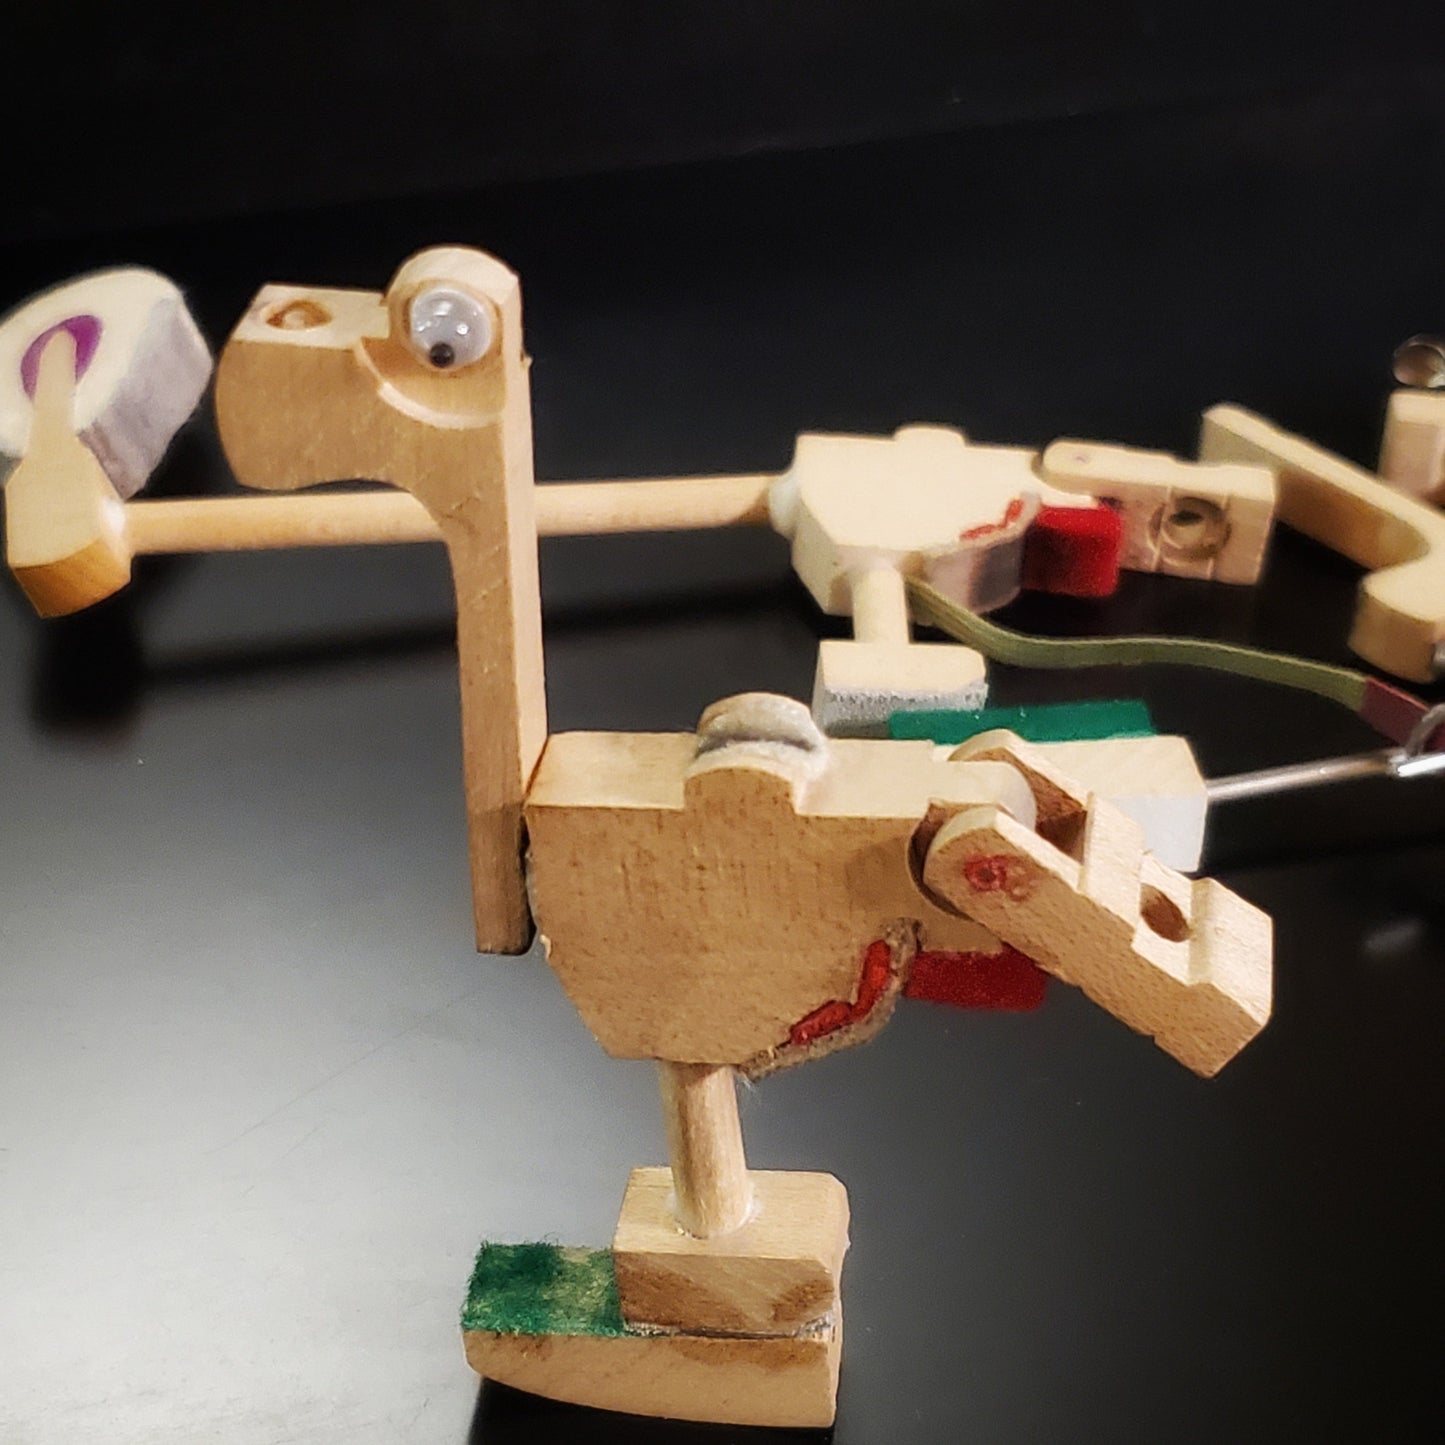 a magnet in the shape of a dinosaur-like animal made from pieces of a piano mechanism - behind it are pieces of piano mechanism like those from which it was made